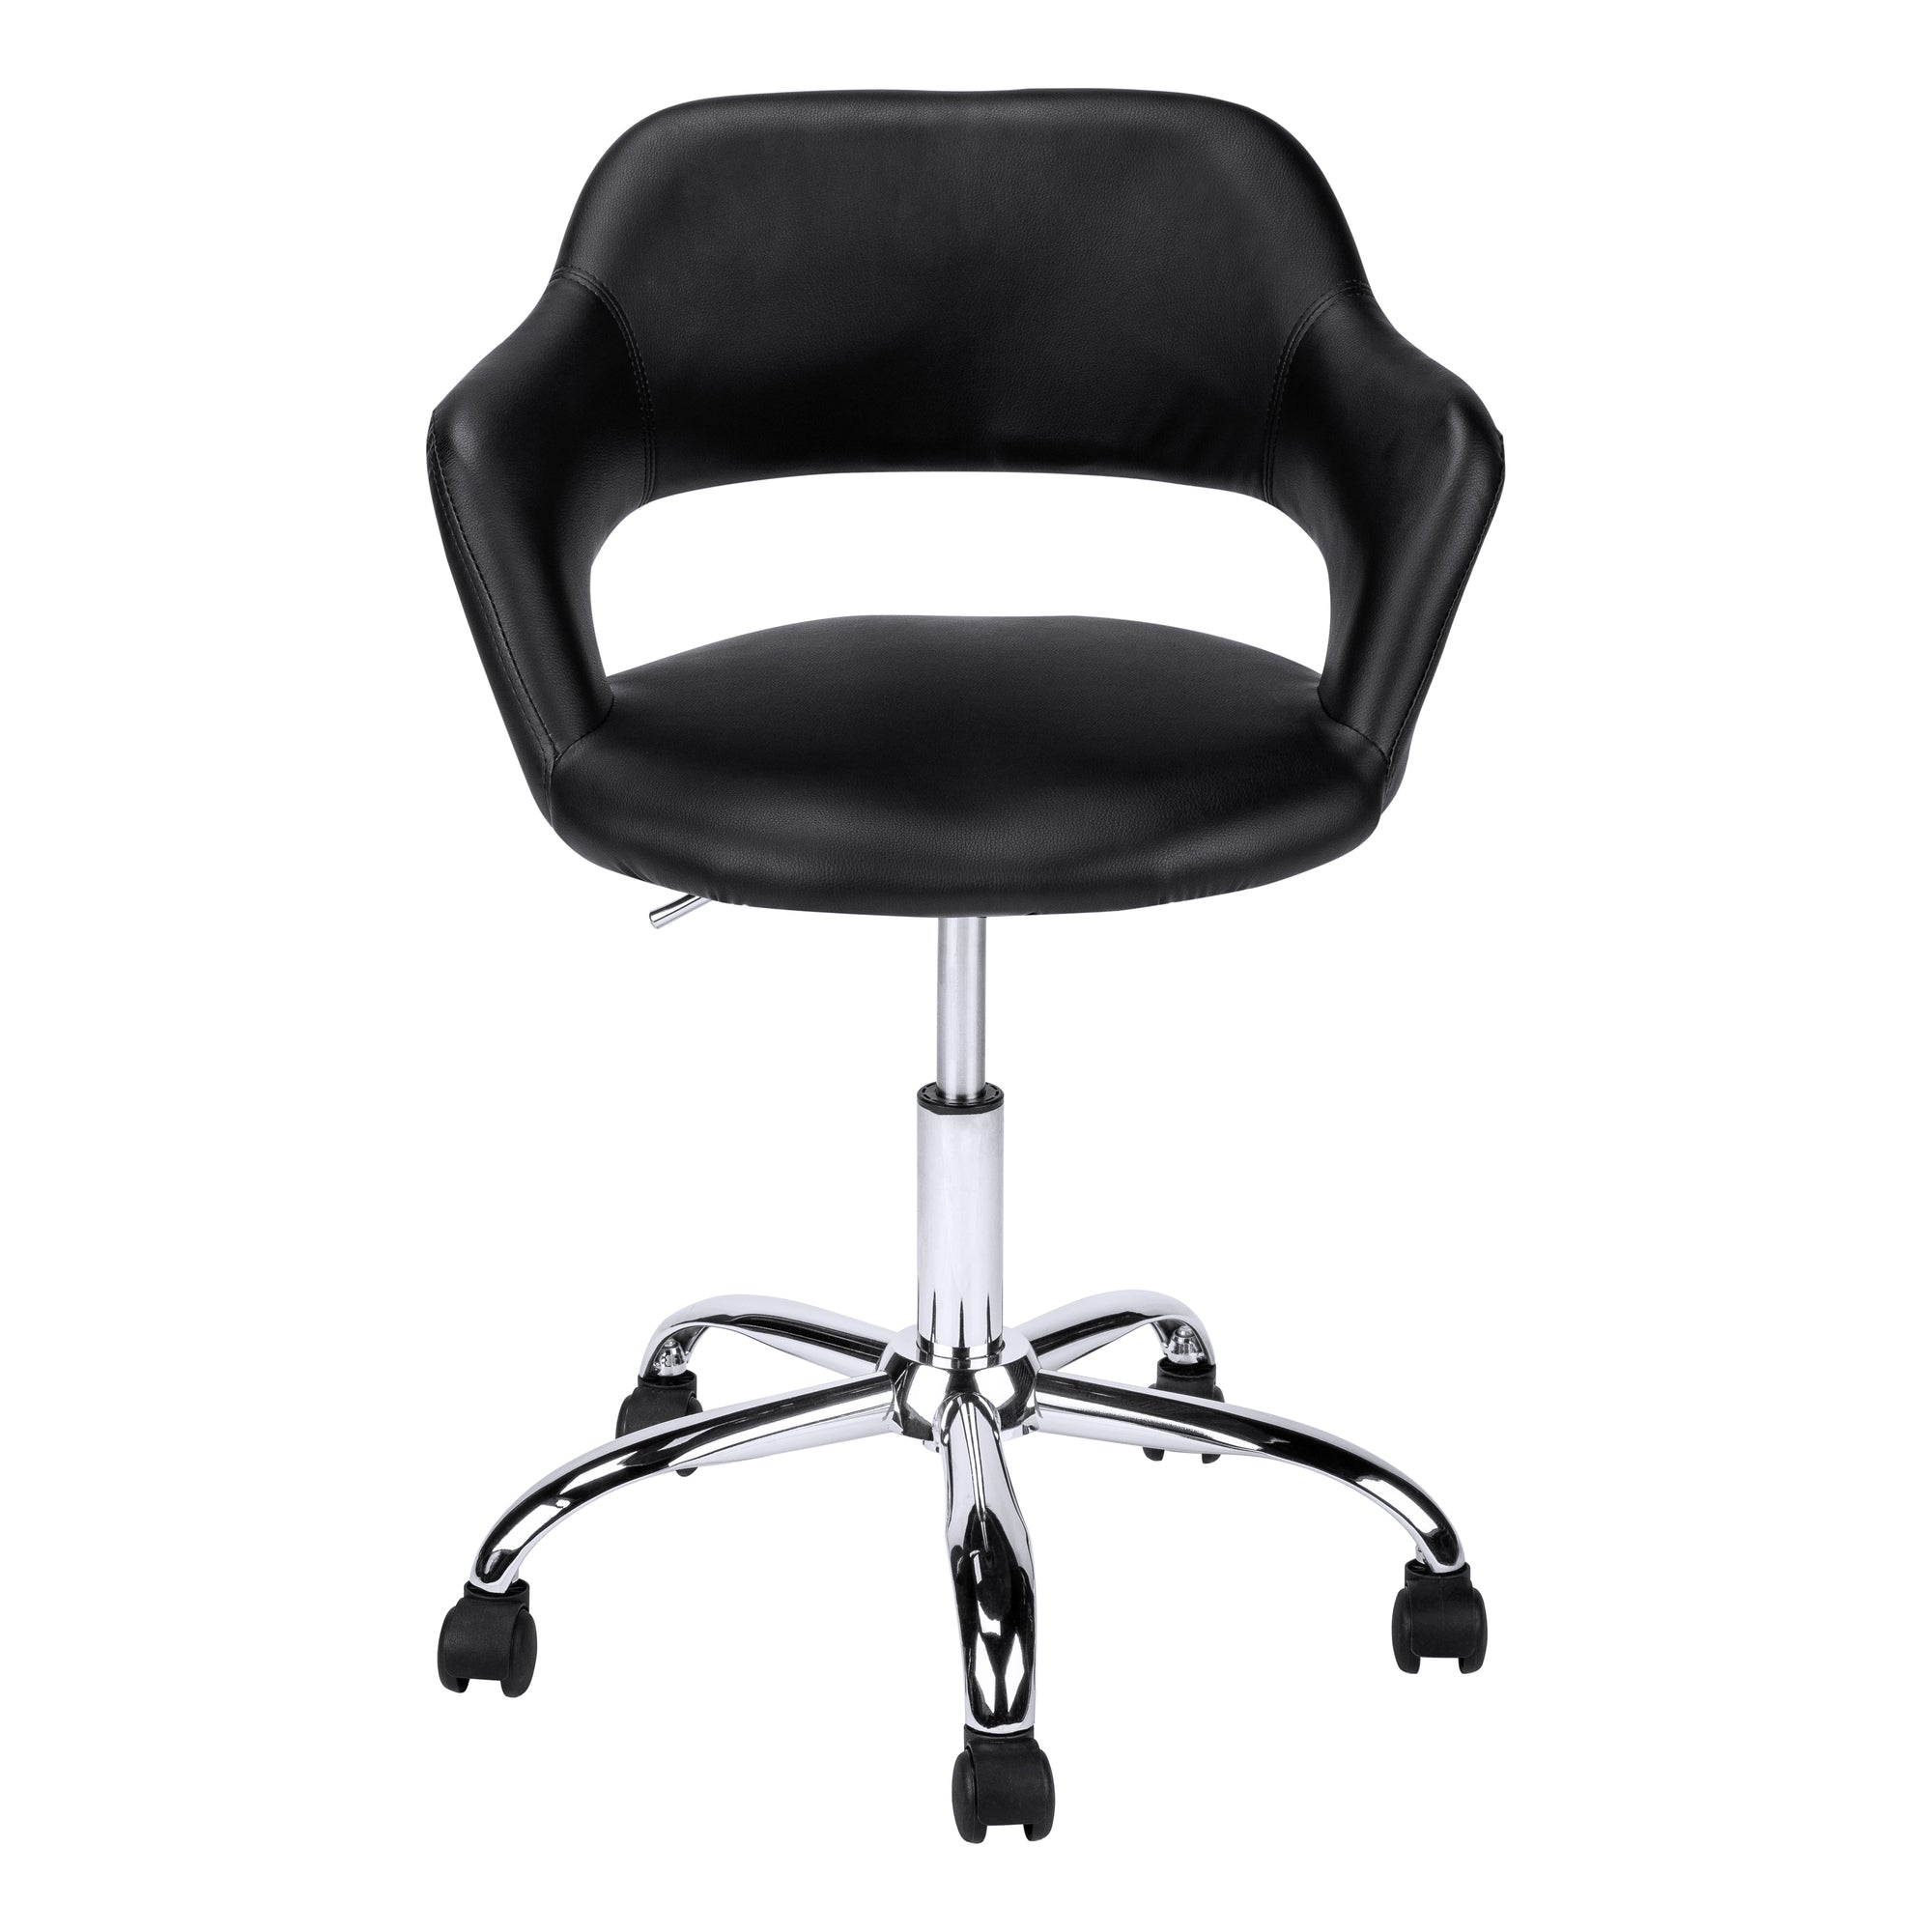 MN-947298    Office Chair, Adjustable Height, Swivel, Ergonomic, Armrests, Computer Desk, Office, Metal Base, Leather Look, Black, Chrome, Contemporary, Modern